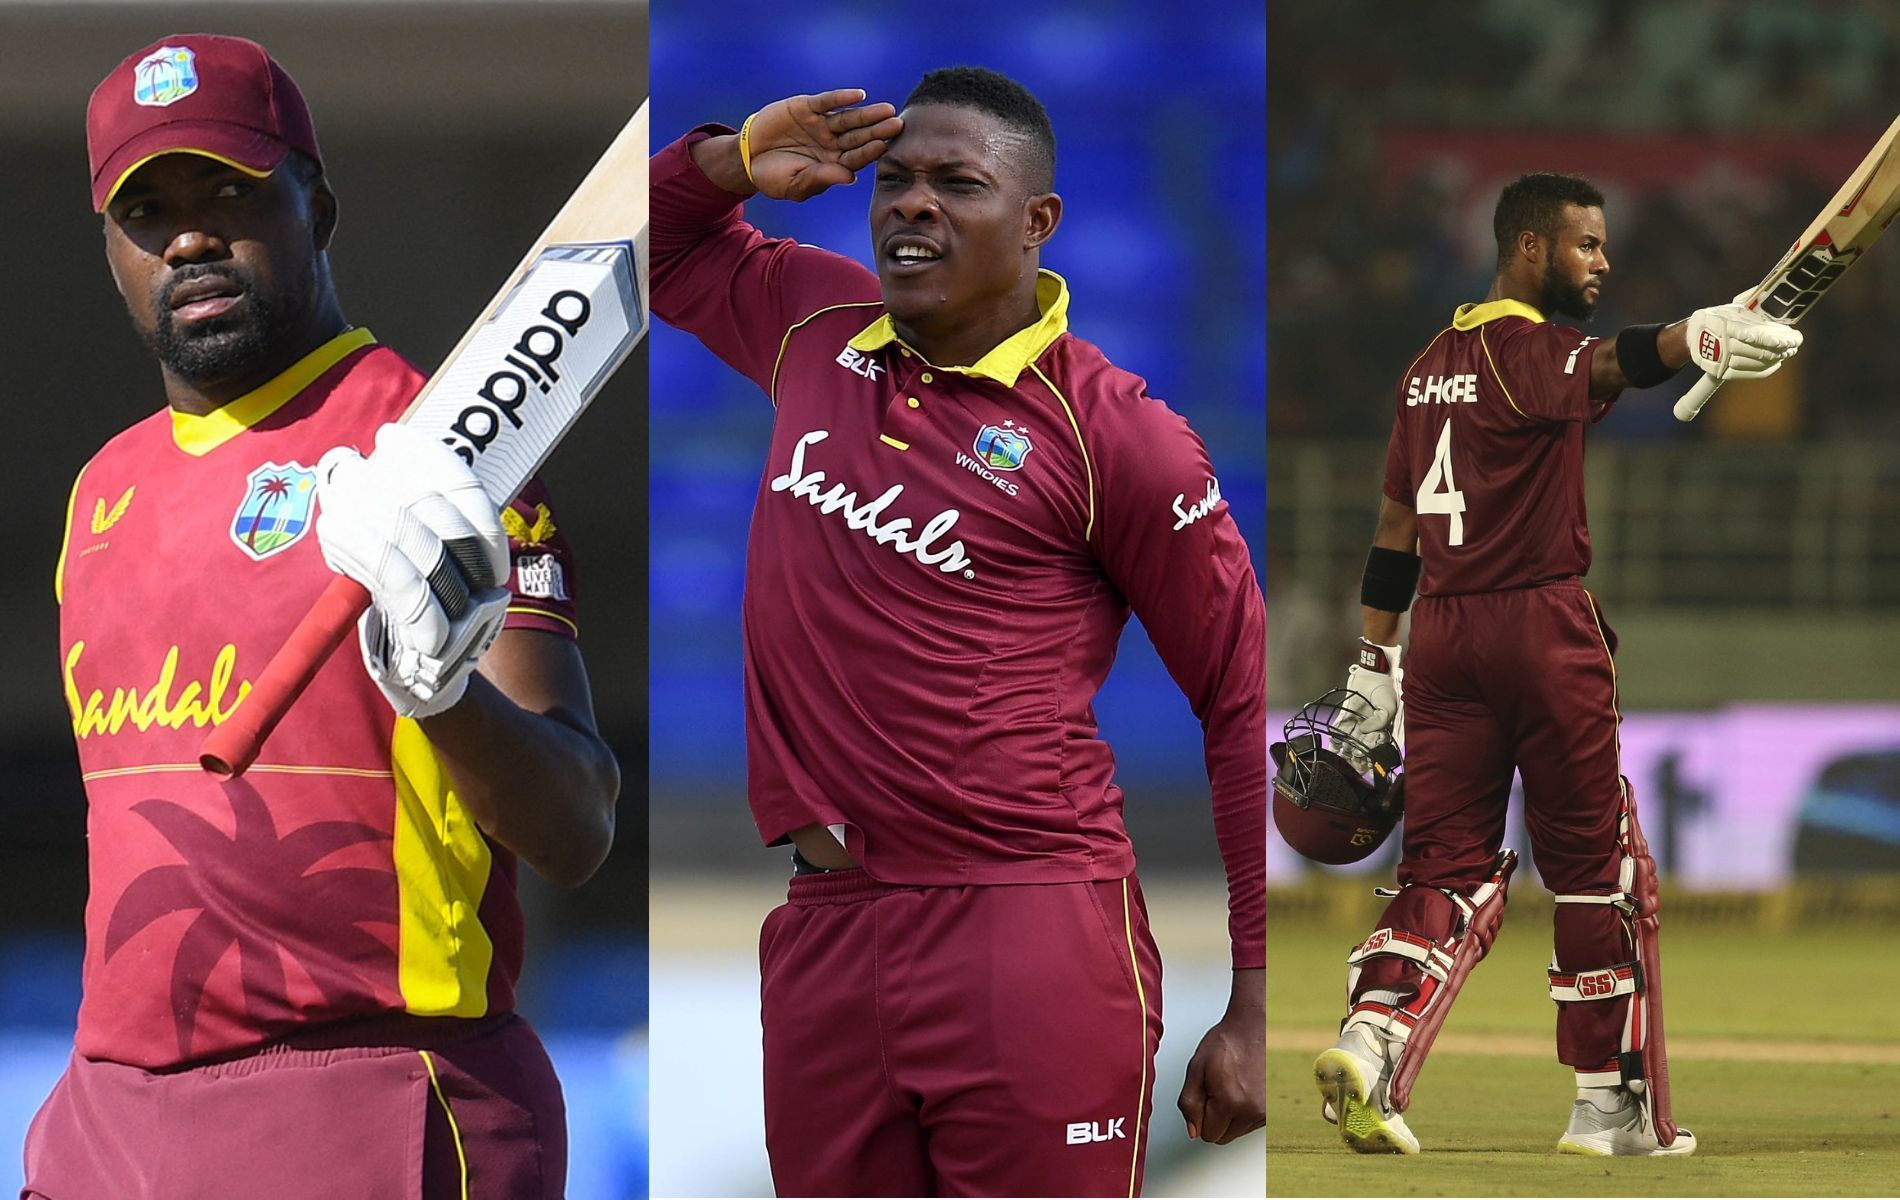 Some West Indies players may not get a bid in the IPL 2022 auction.